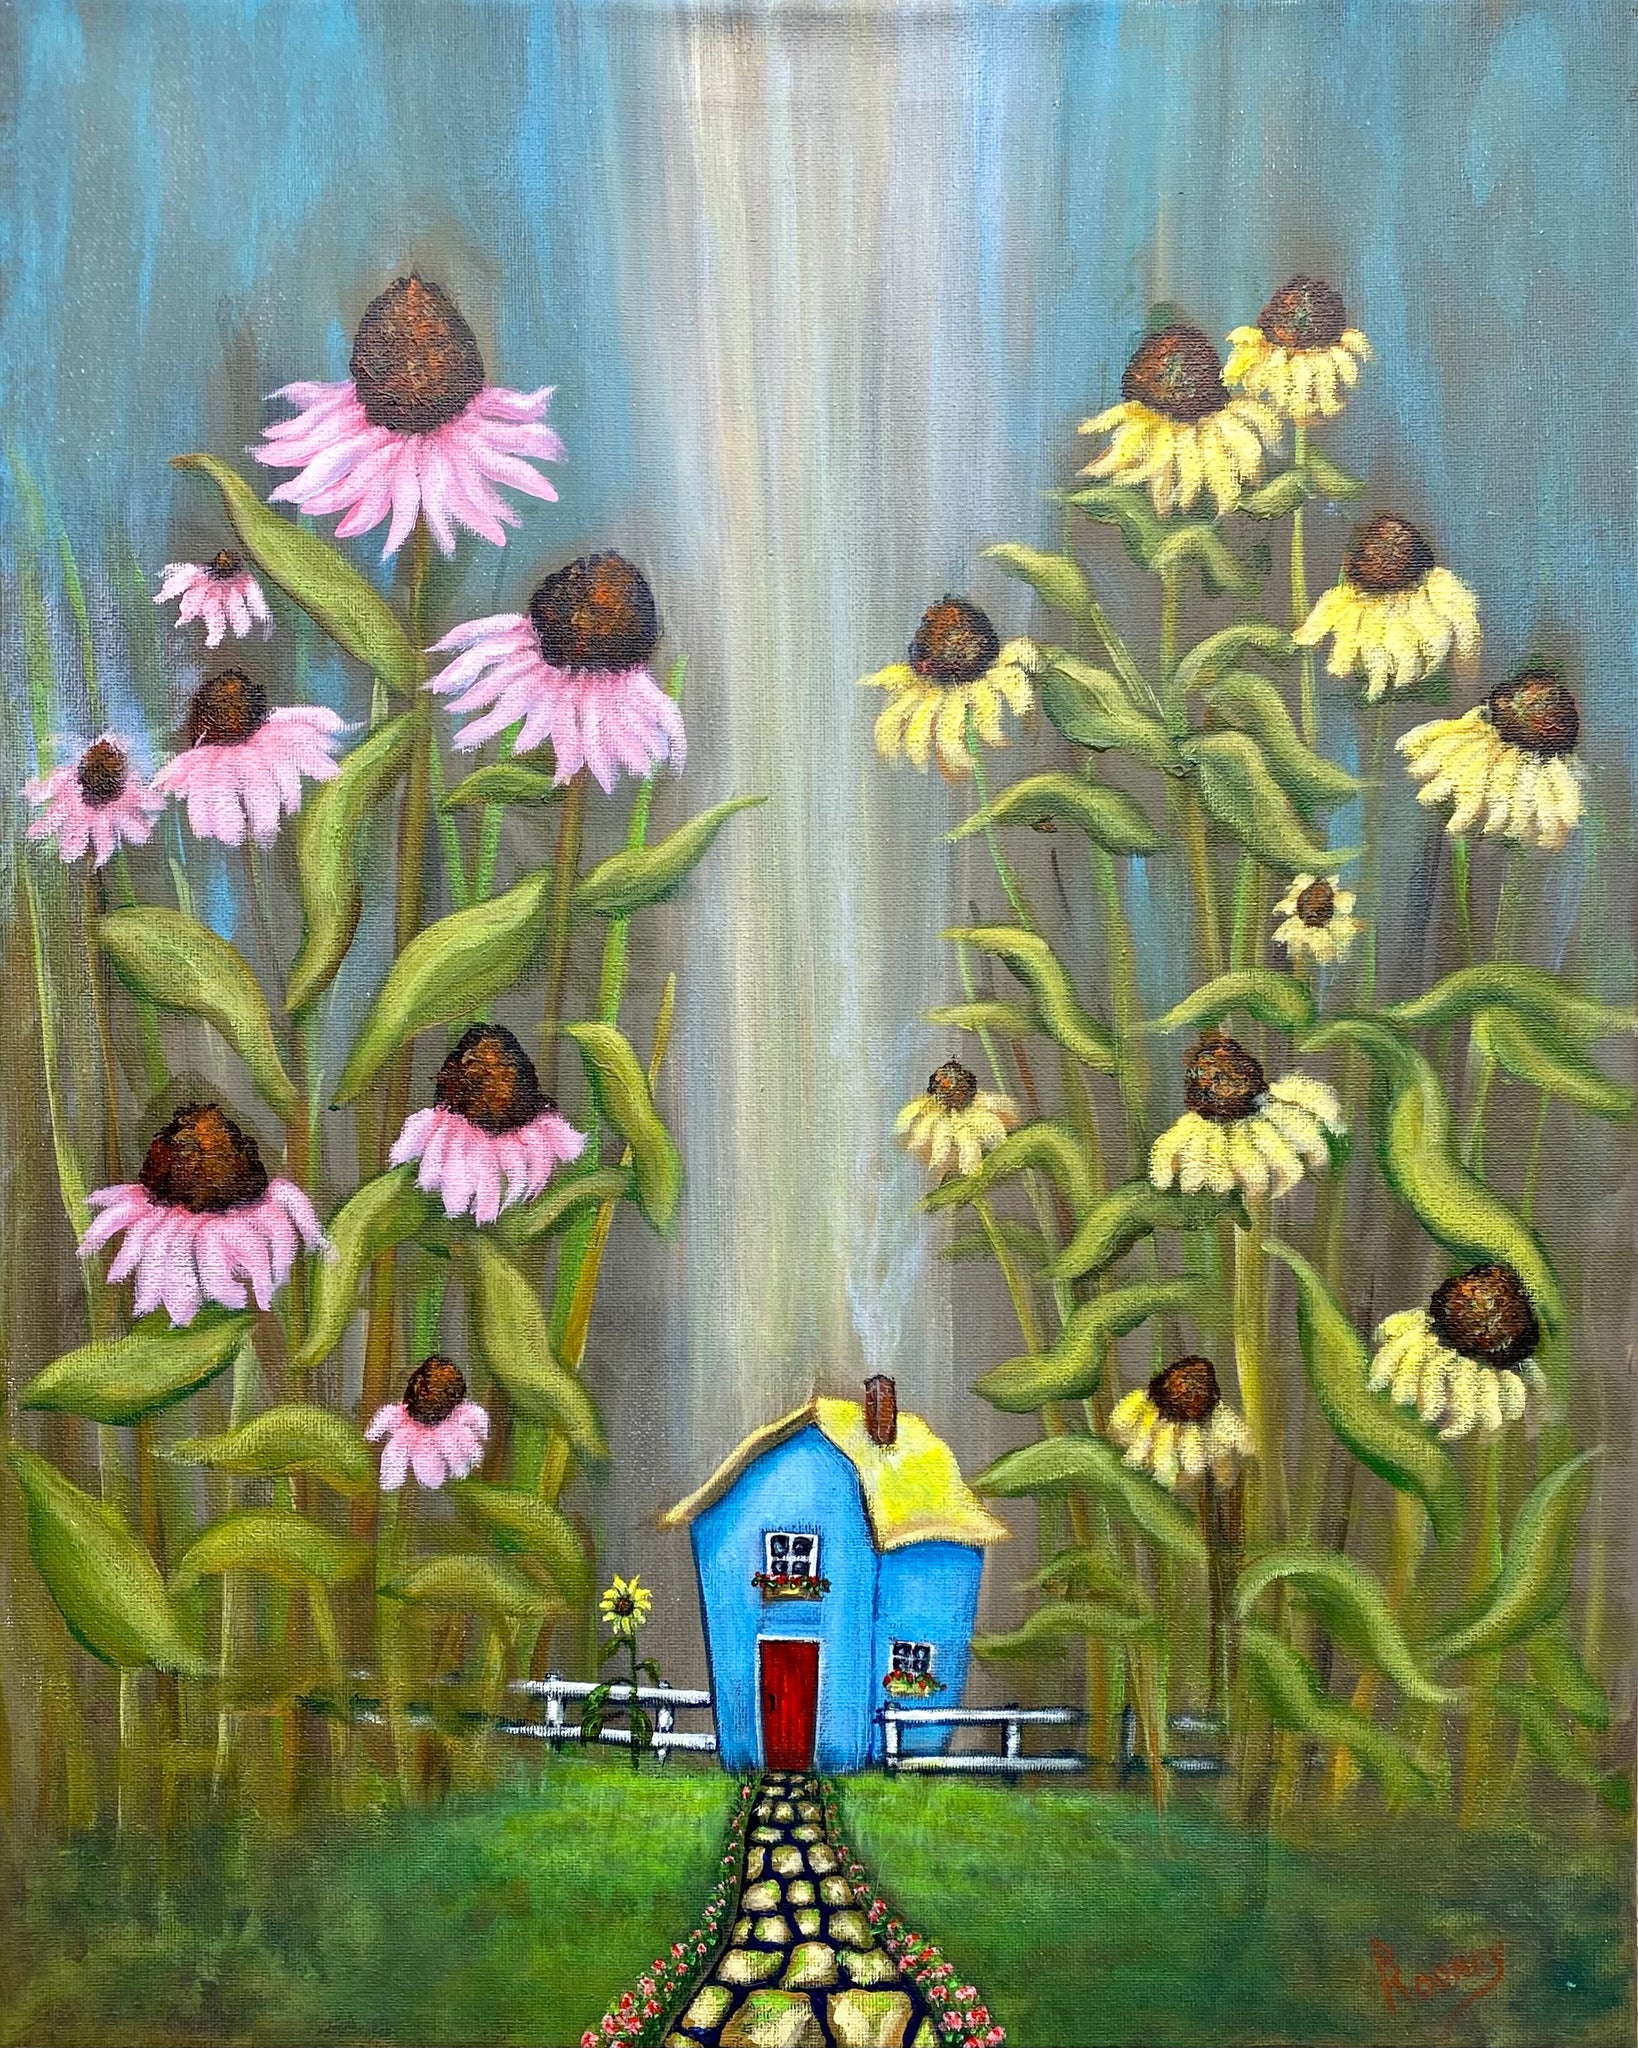 “Little House” Series of Paintings by Bryan Rooney